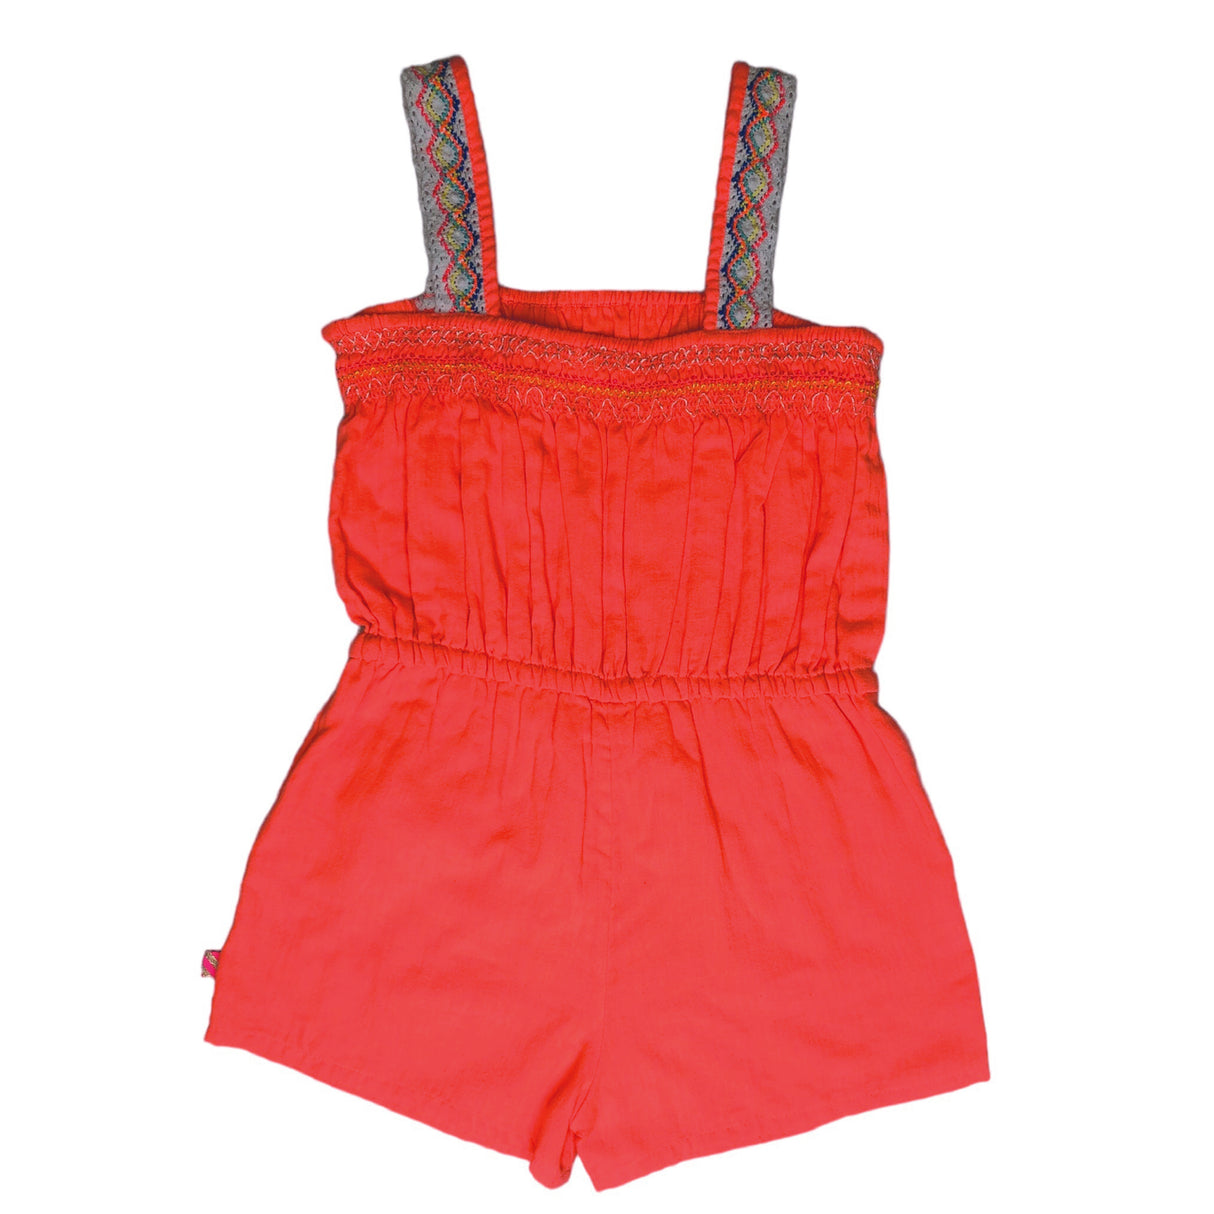 A Second Chance - Billie Blush Romper Kids 8 - Delivery all Over Lebanon